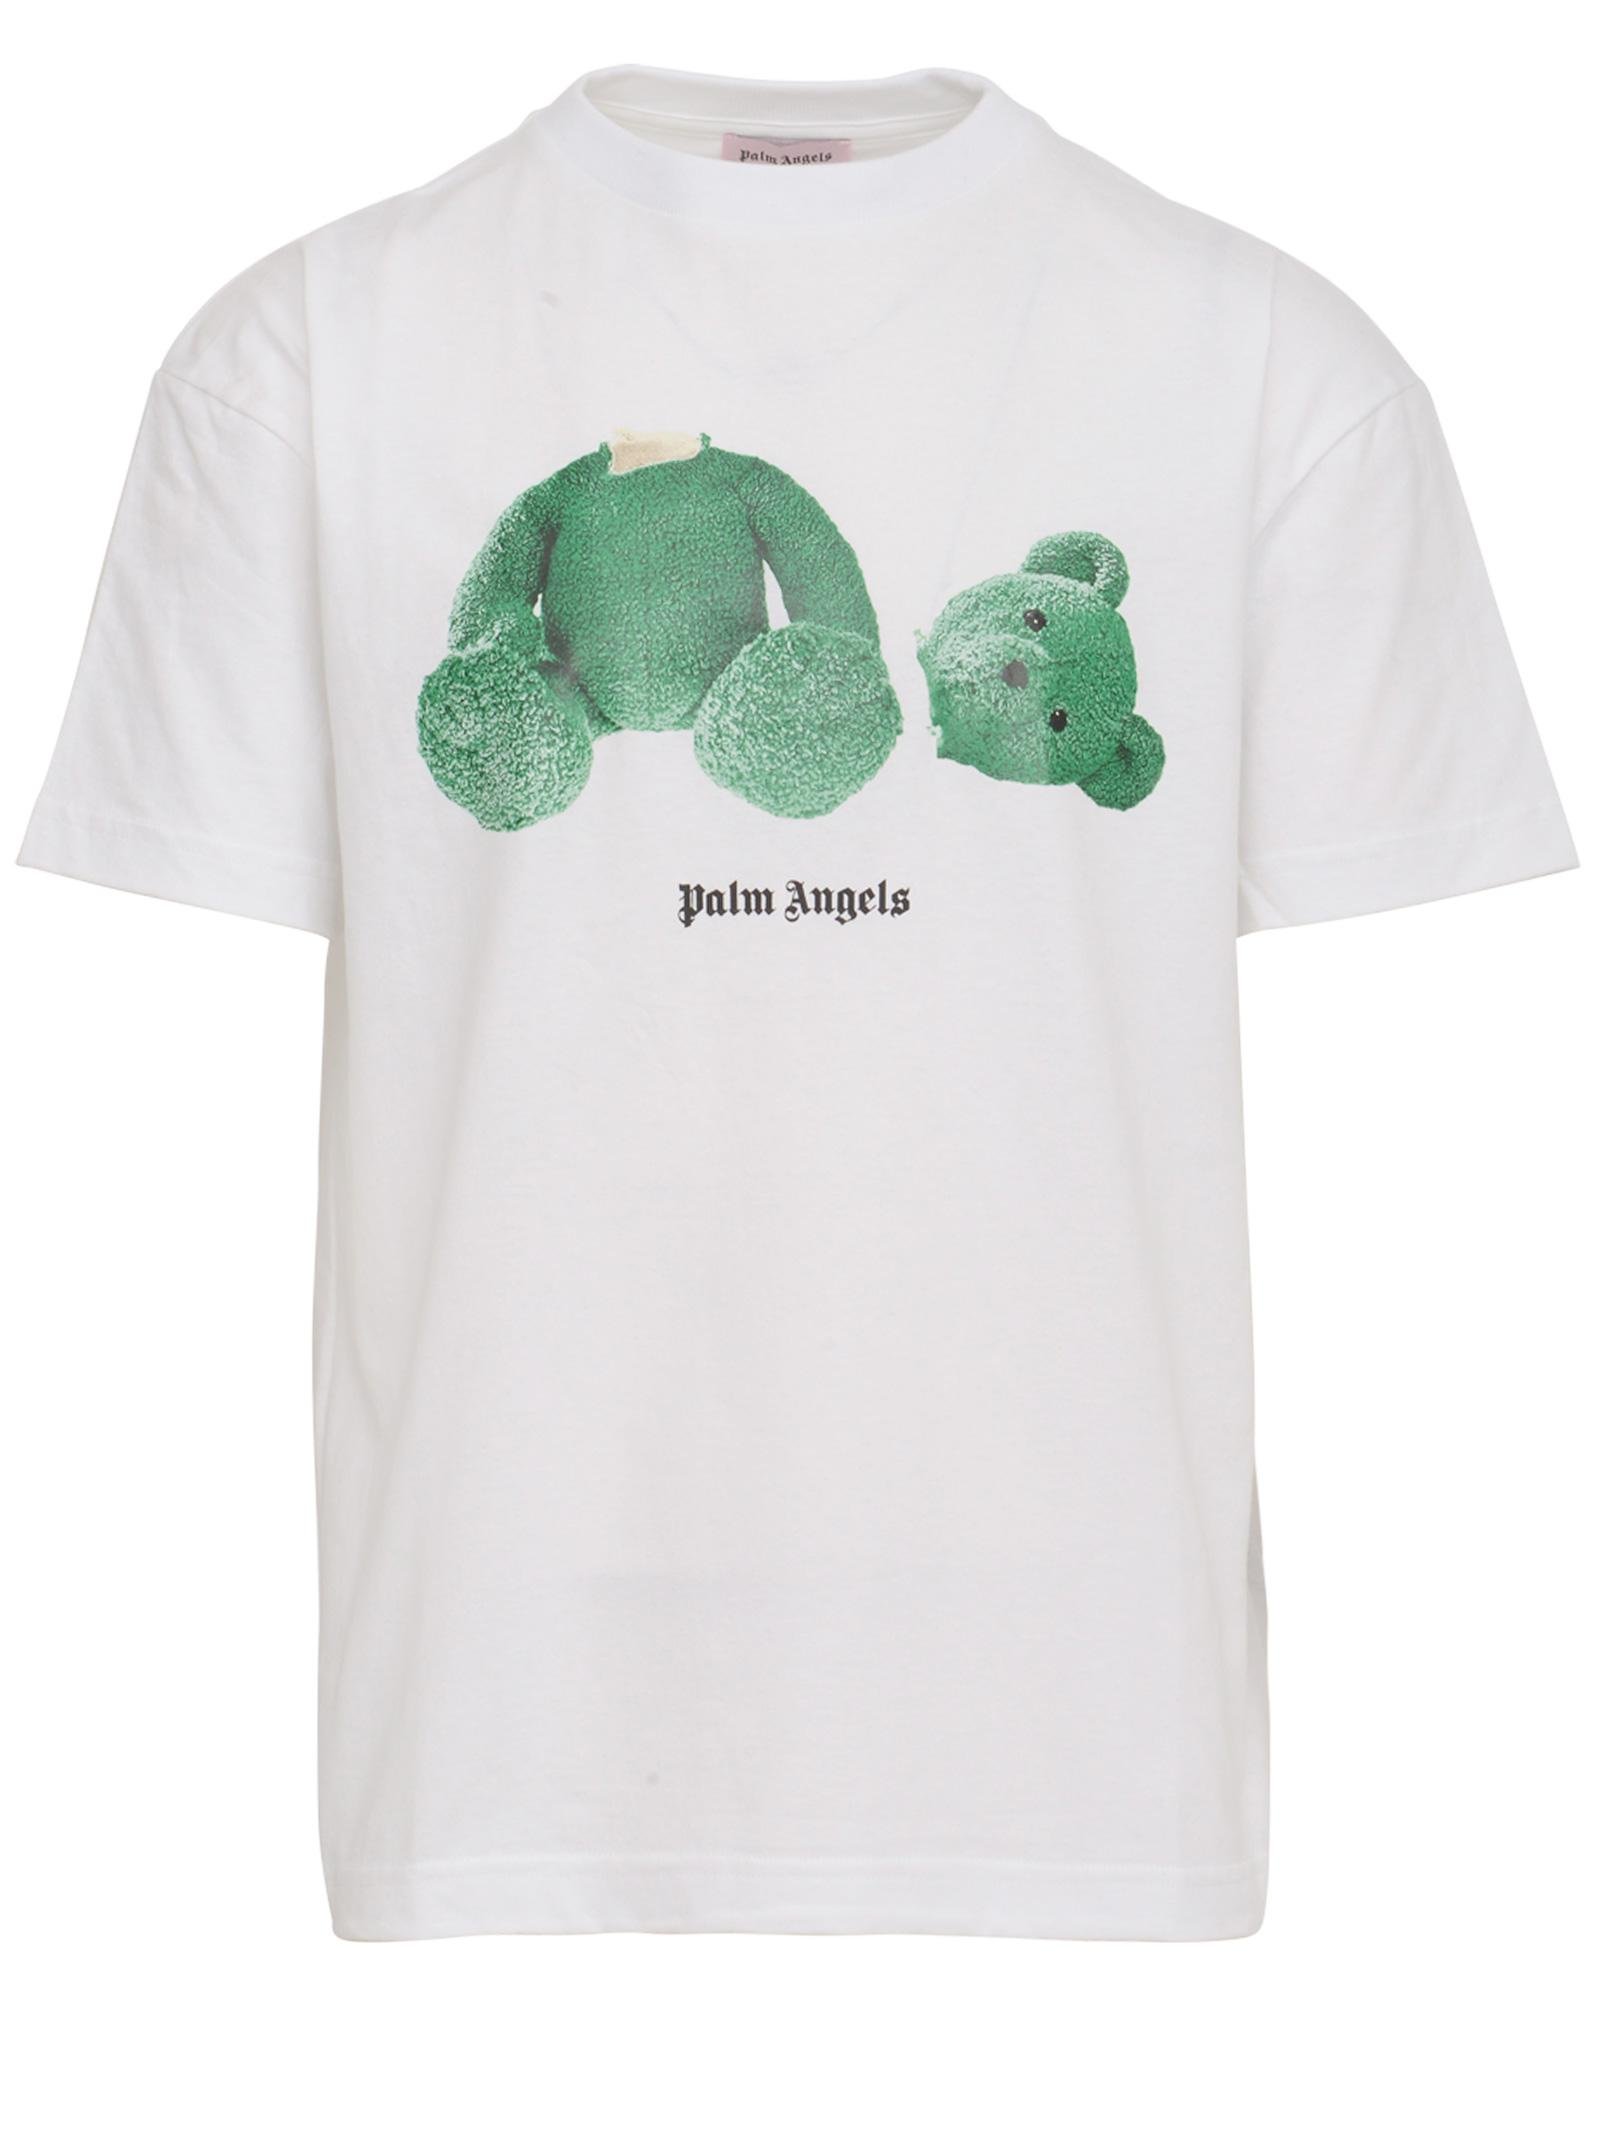 Palm Angels White Kill The Bear Cotton T-shirt With Green Teddy Bear  Printed On The Chest. for Men